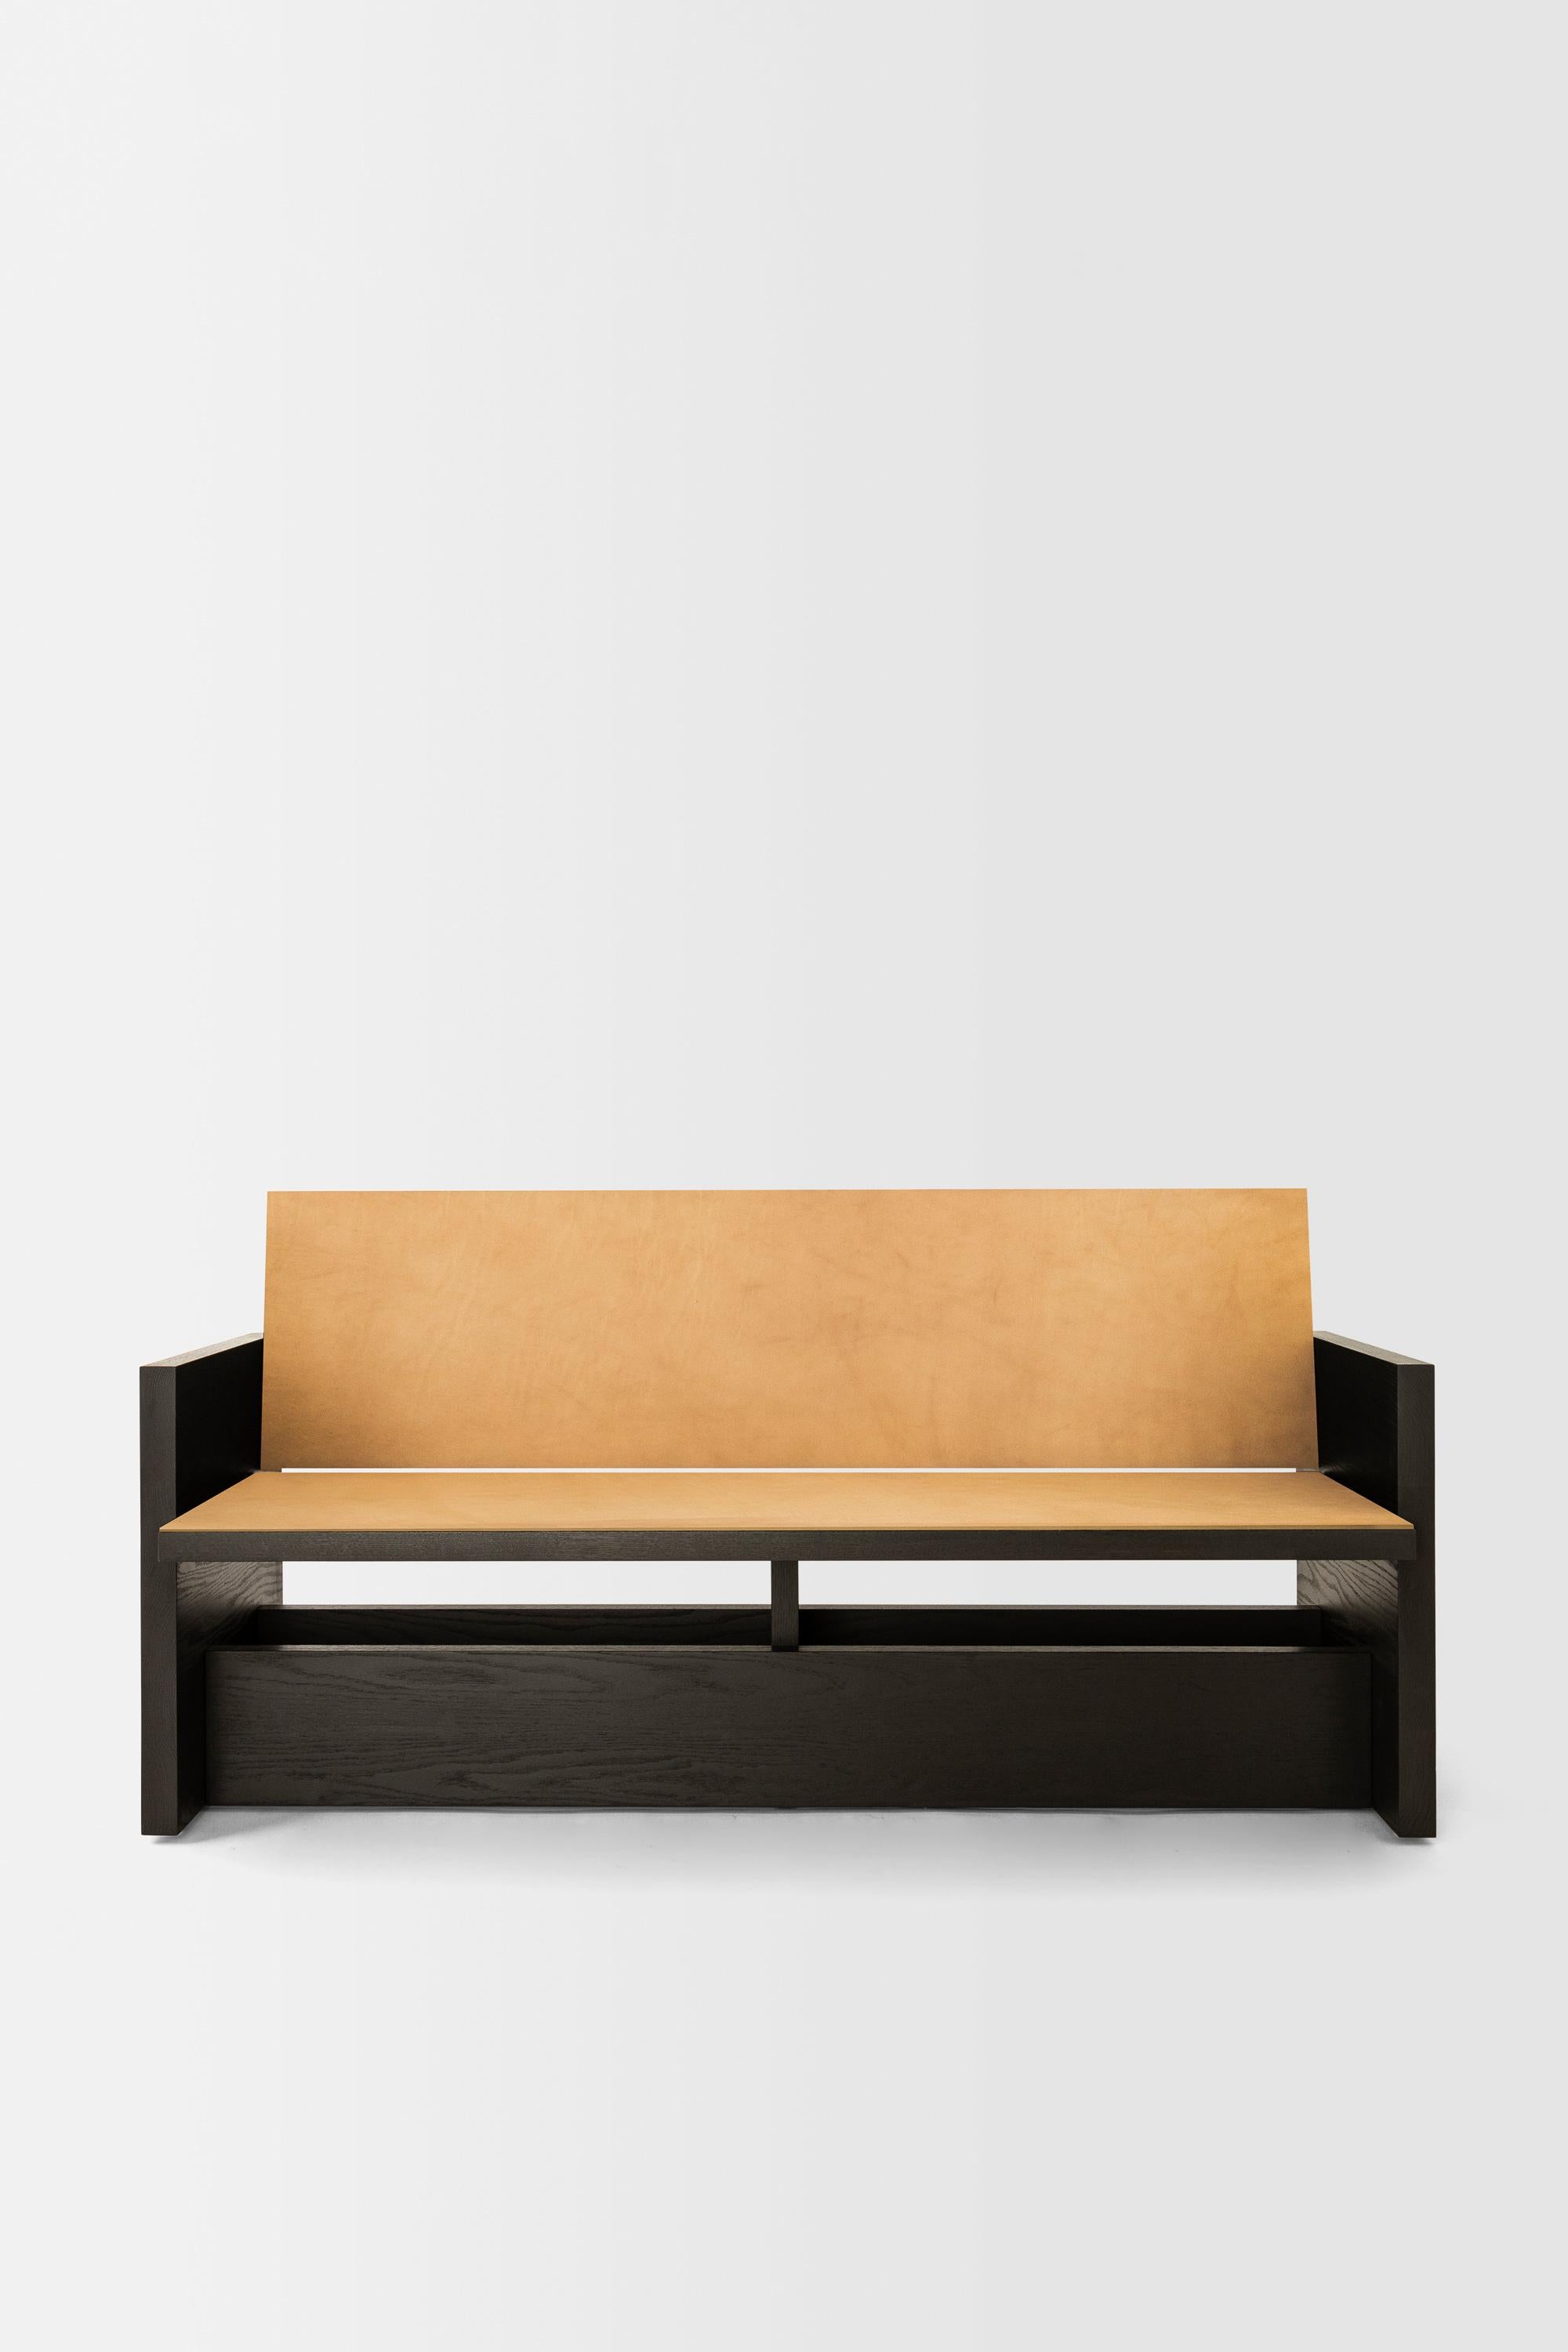 Simple lines and noble materials define Clavijero, a bench. Made by hand using traditional carpentry techniques, these two pieces are created for conversation, reading, rest, and contemplation.

Clavijero takes its name from one of the oldest